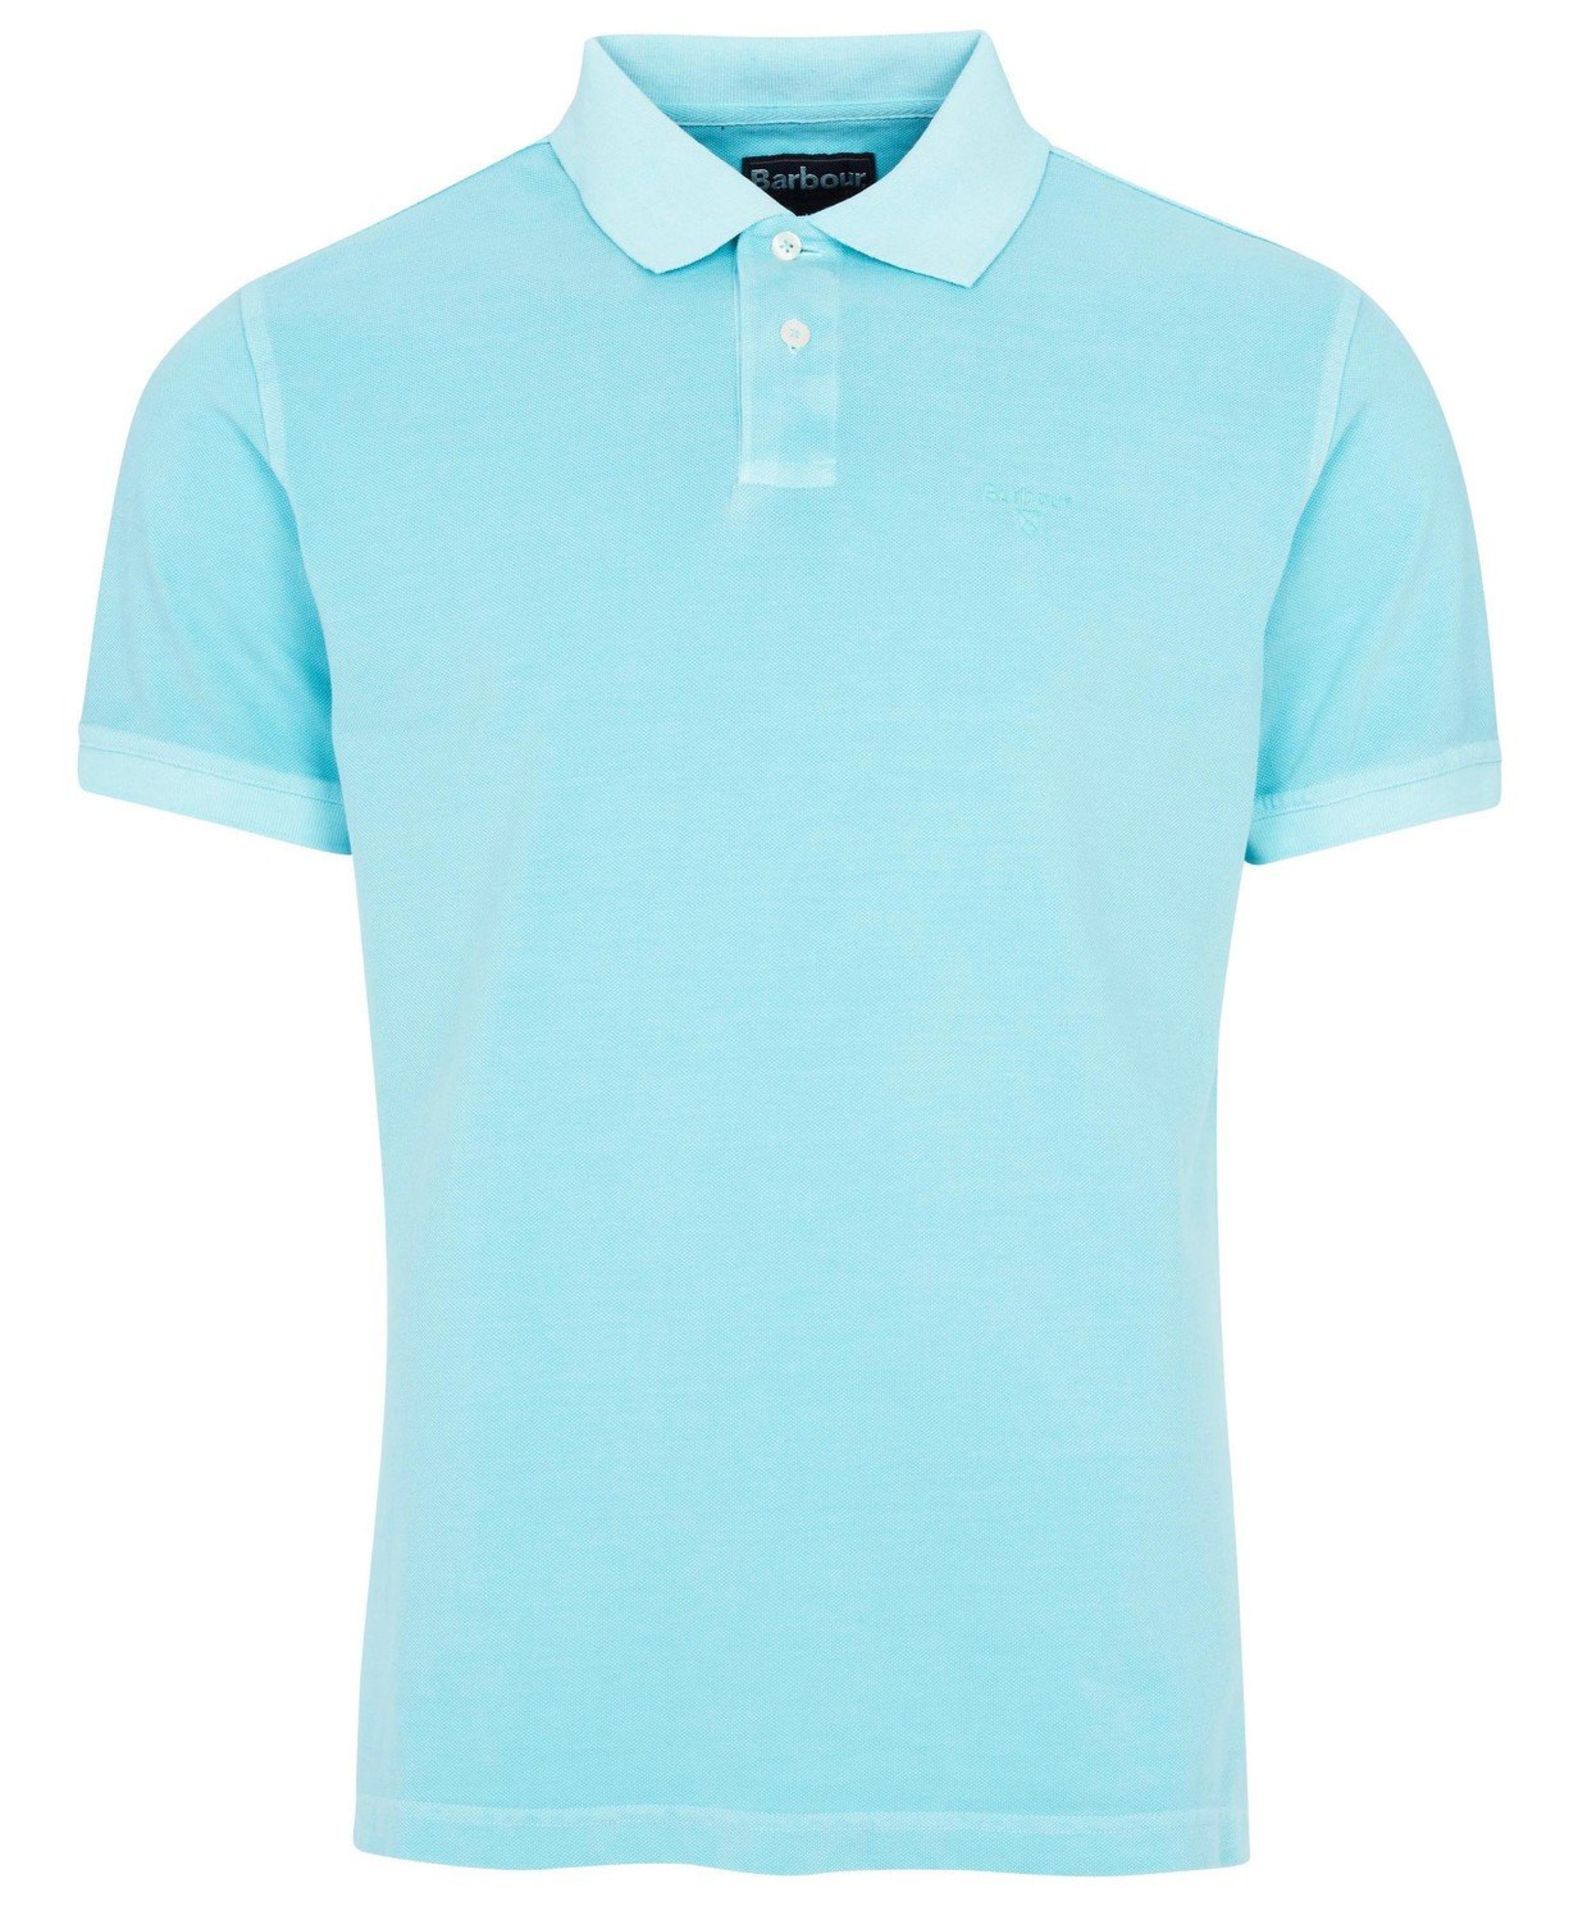 BRAND NEW BARBOUR WASHED SPORT POLO TOP AQUA MARINE SIZE XXL RRP £50 - 2